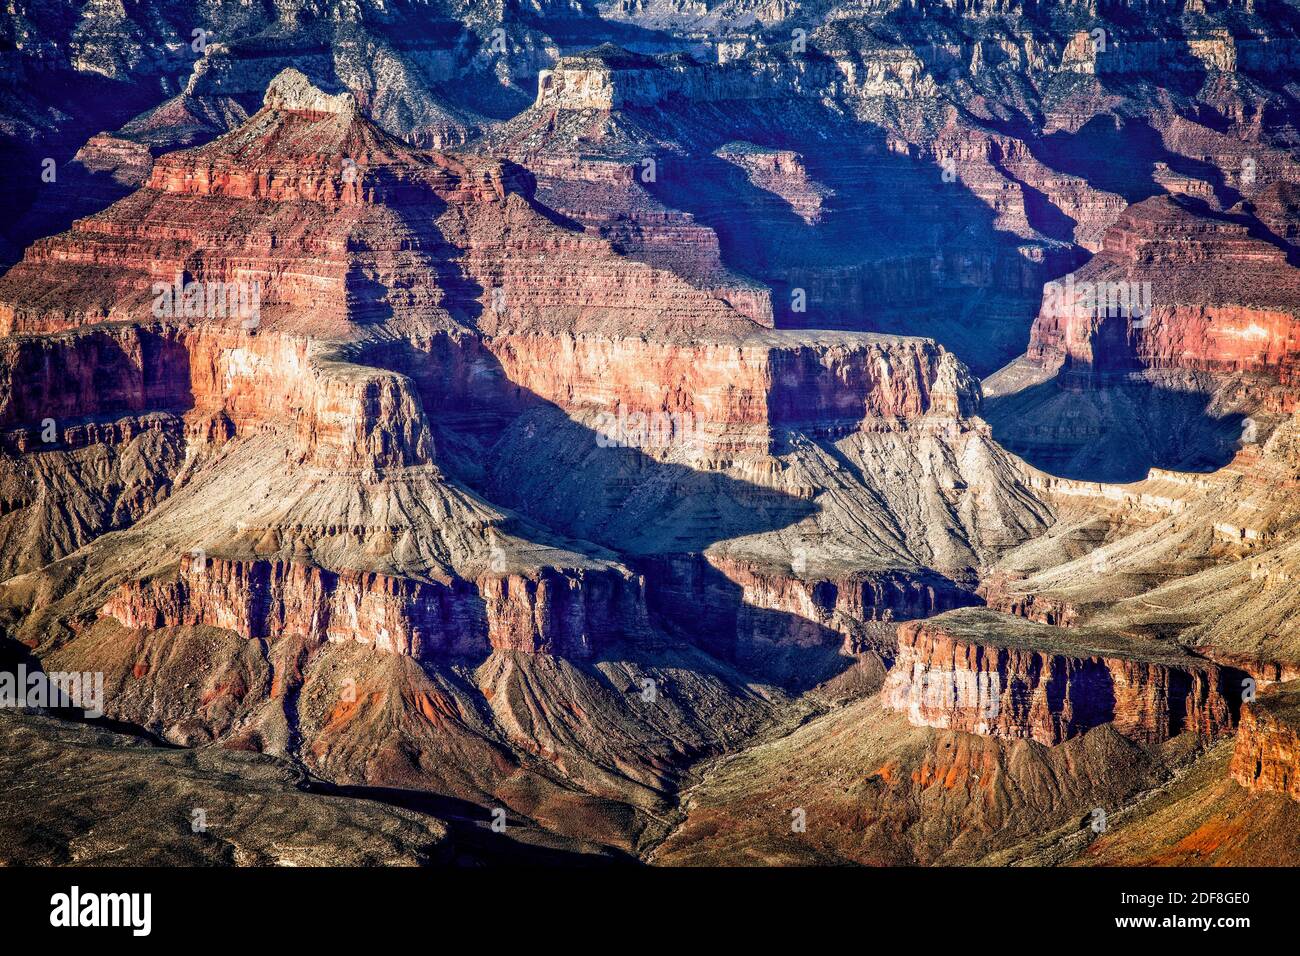 The carved canyons inside of Grand Canyon National Park in Arizona. Stock Photo